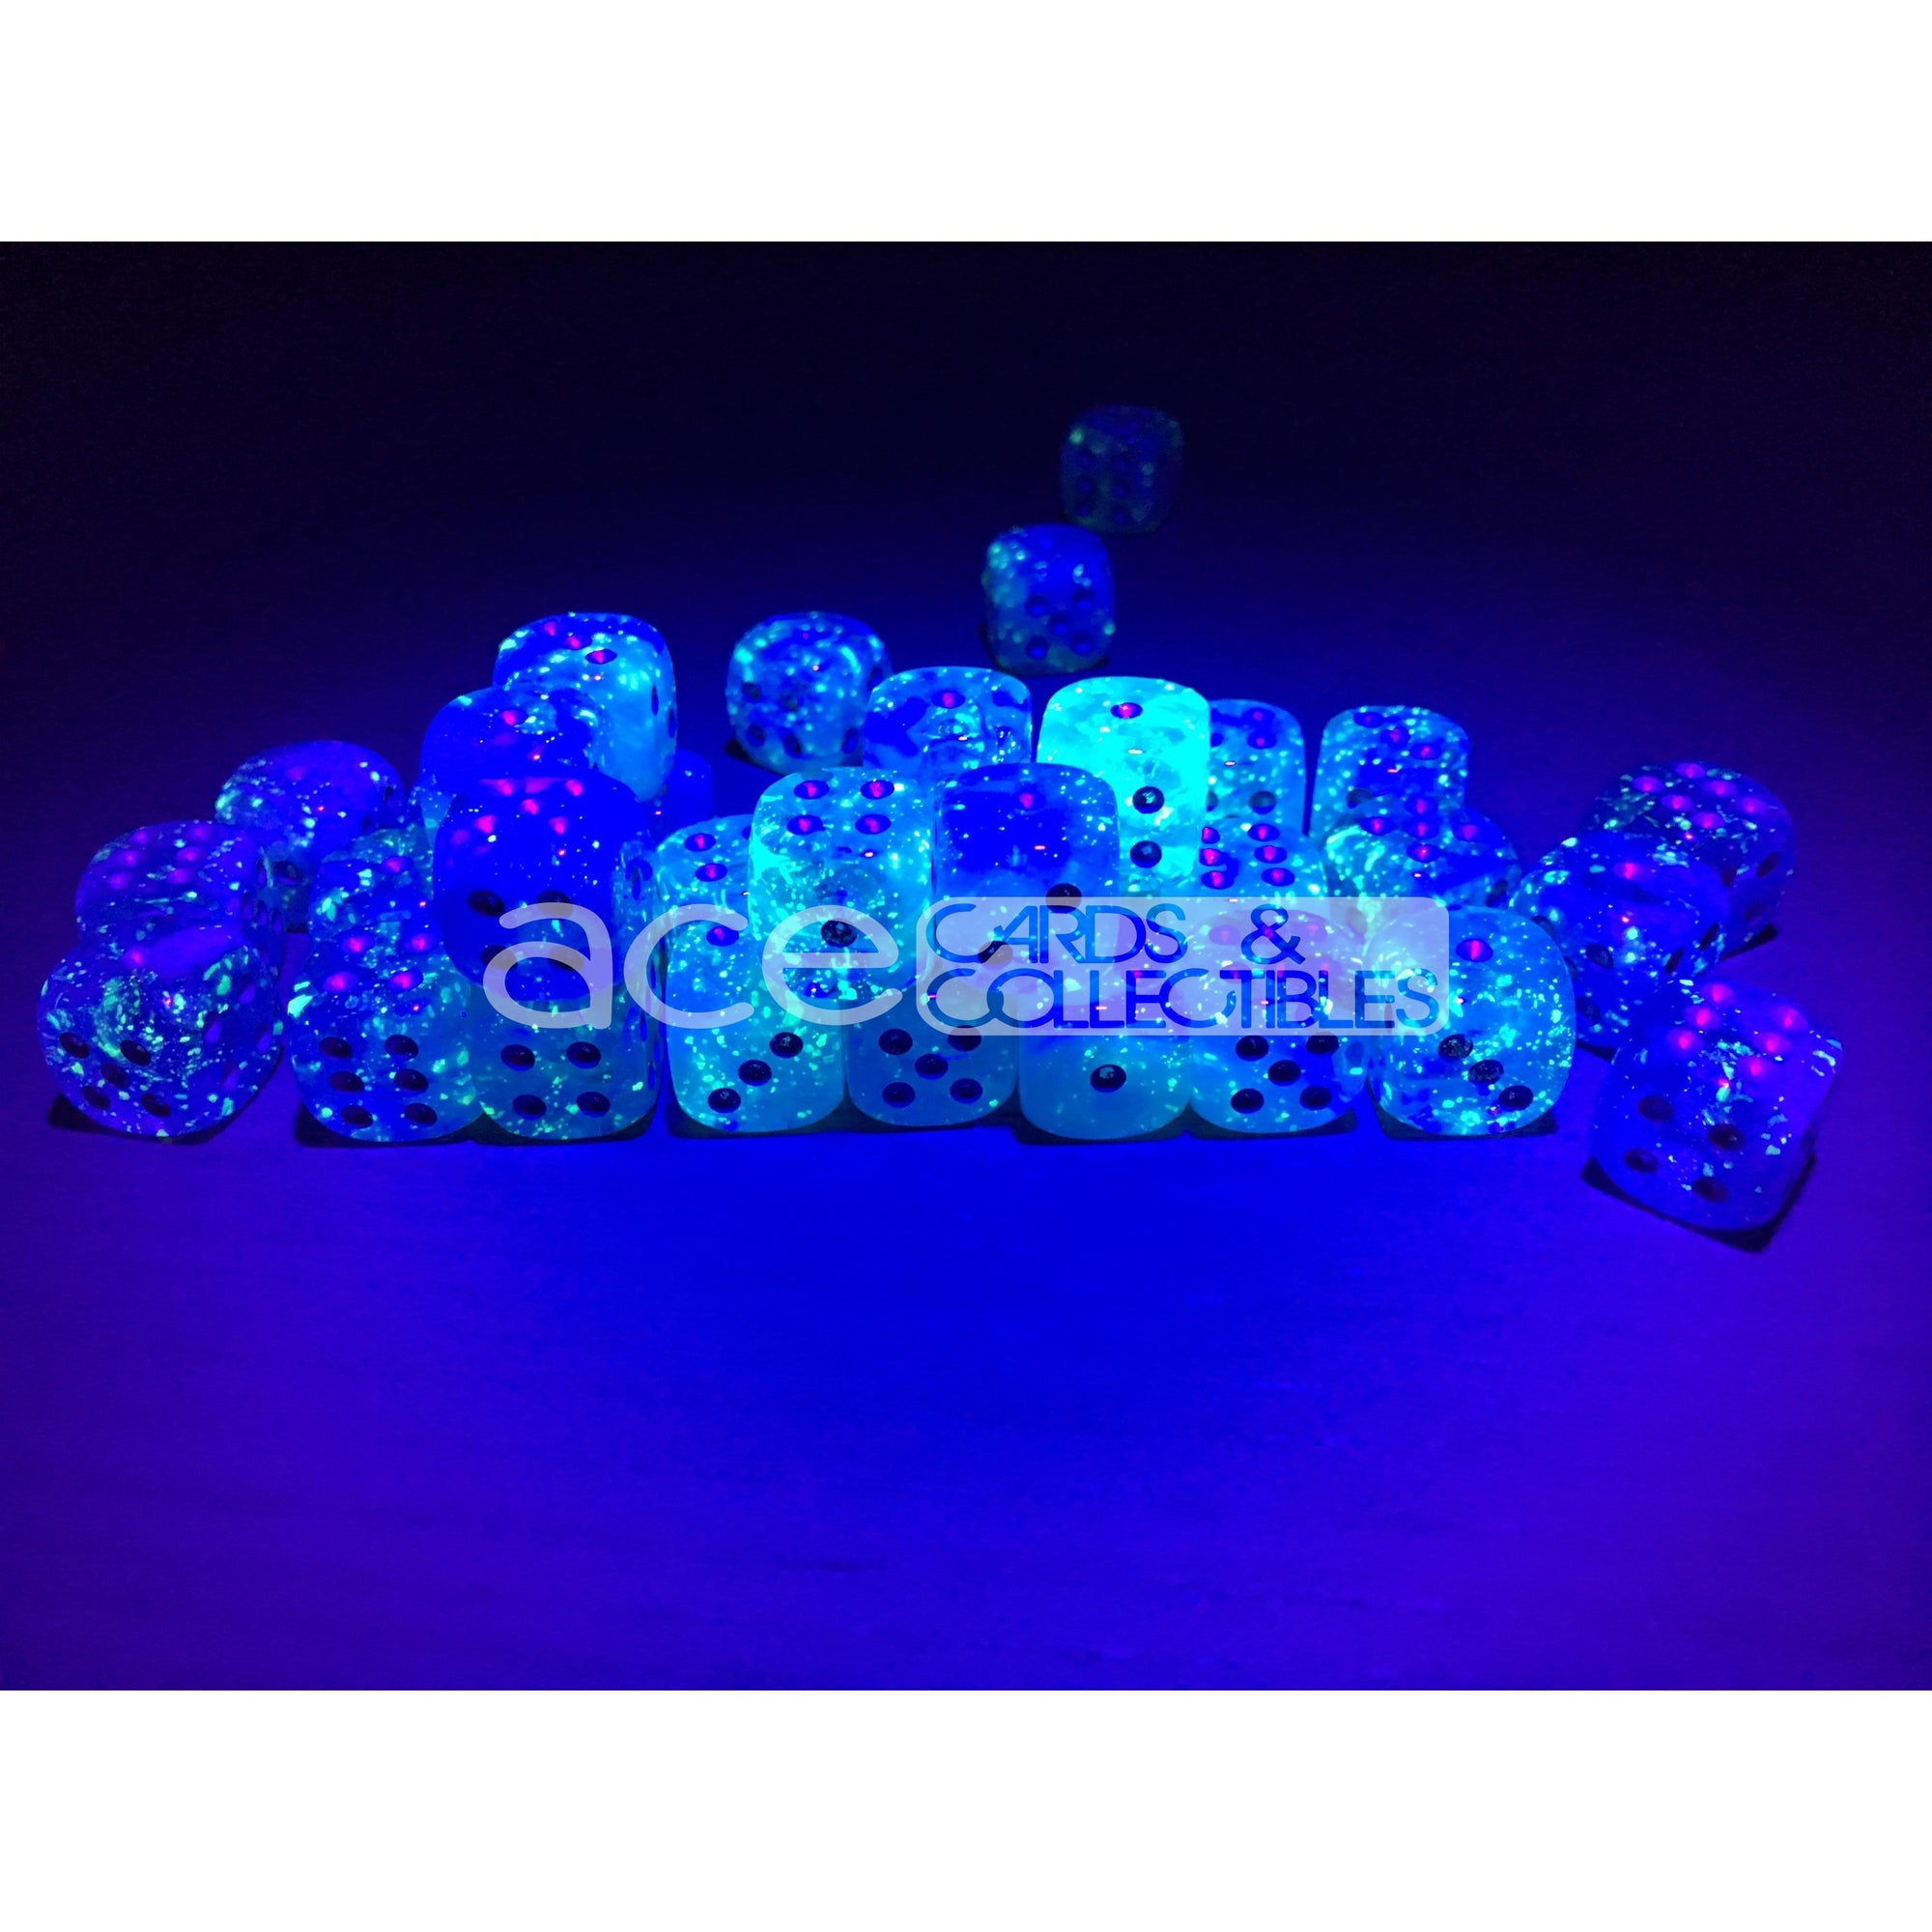 Chessex Luminary Glow in Dark 12mm d6 Dice (Sky) (Loose)-Chessex-Ace Cards & Collectibles